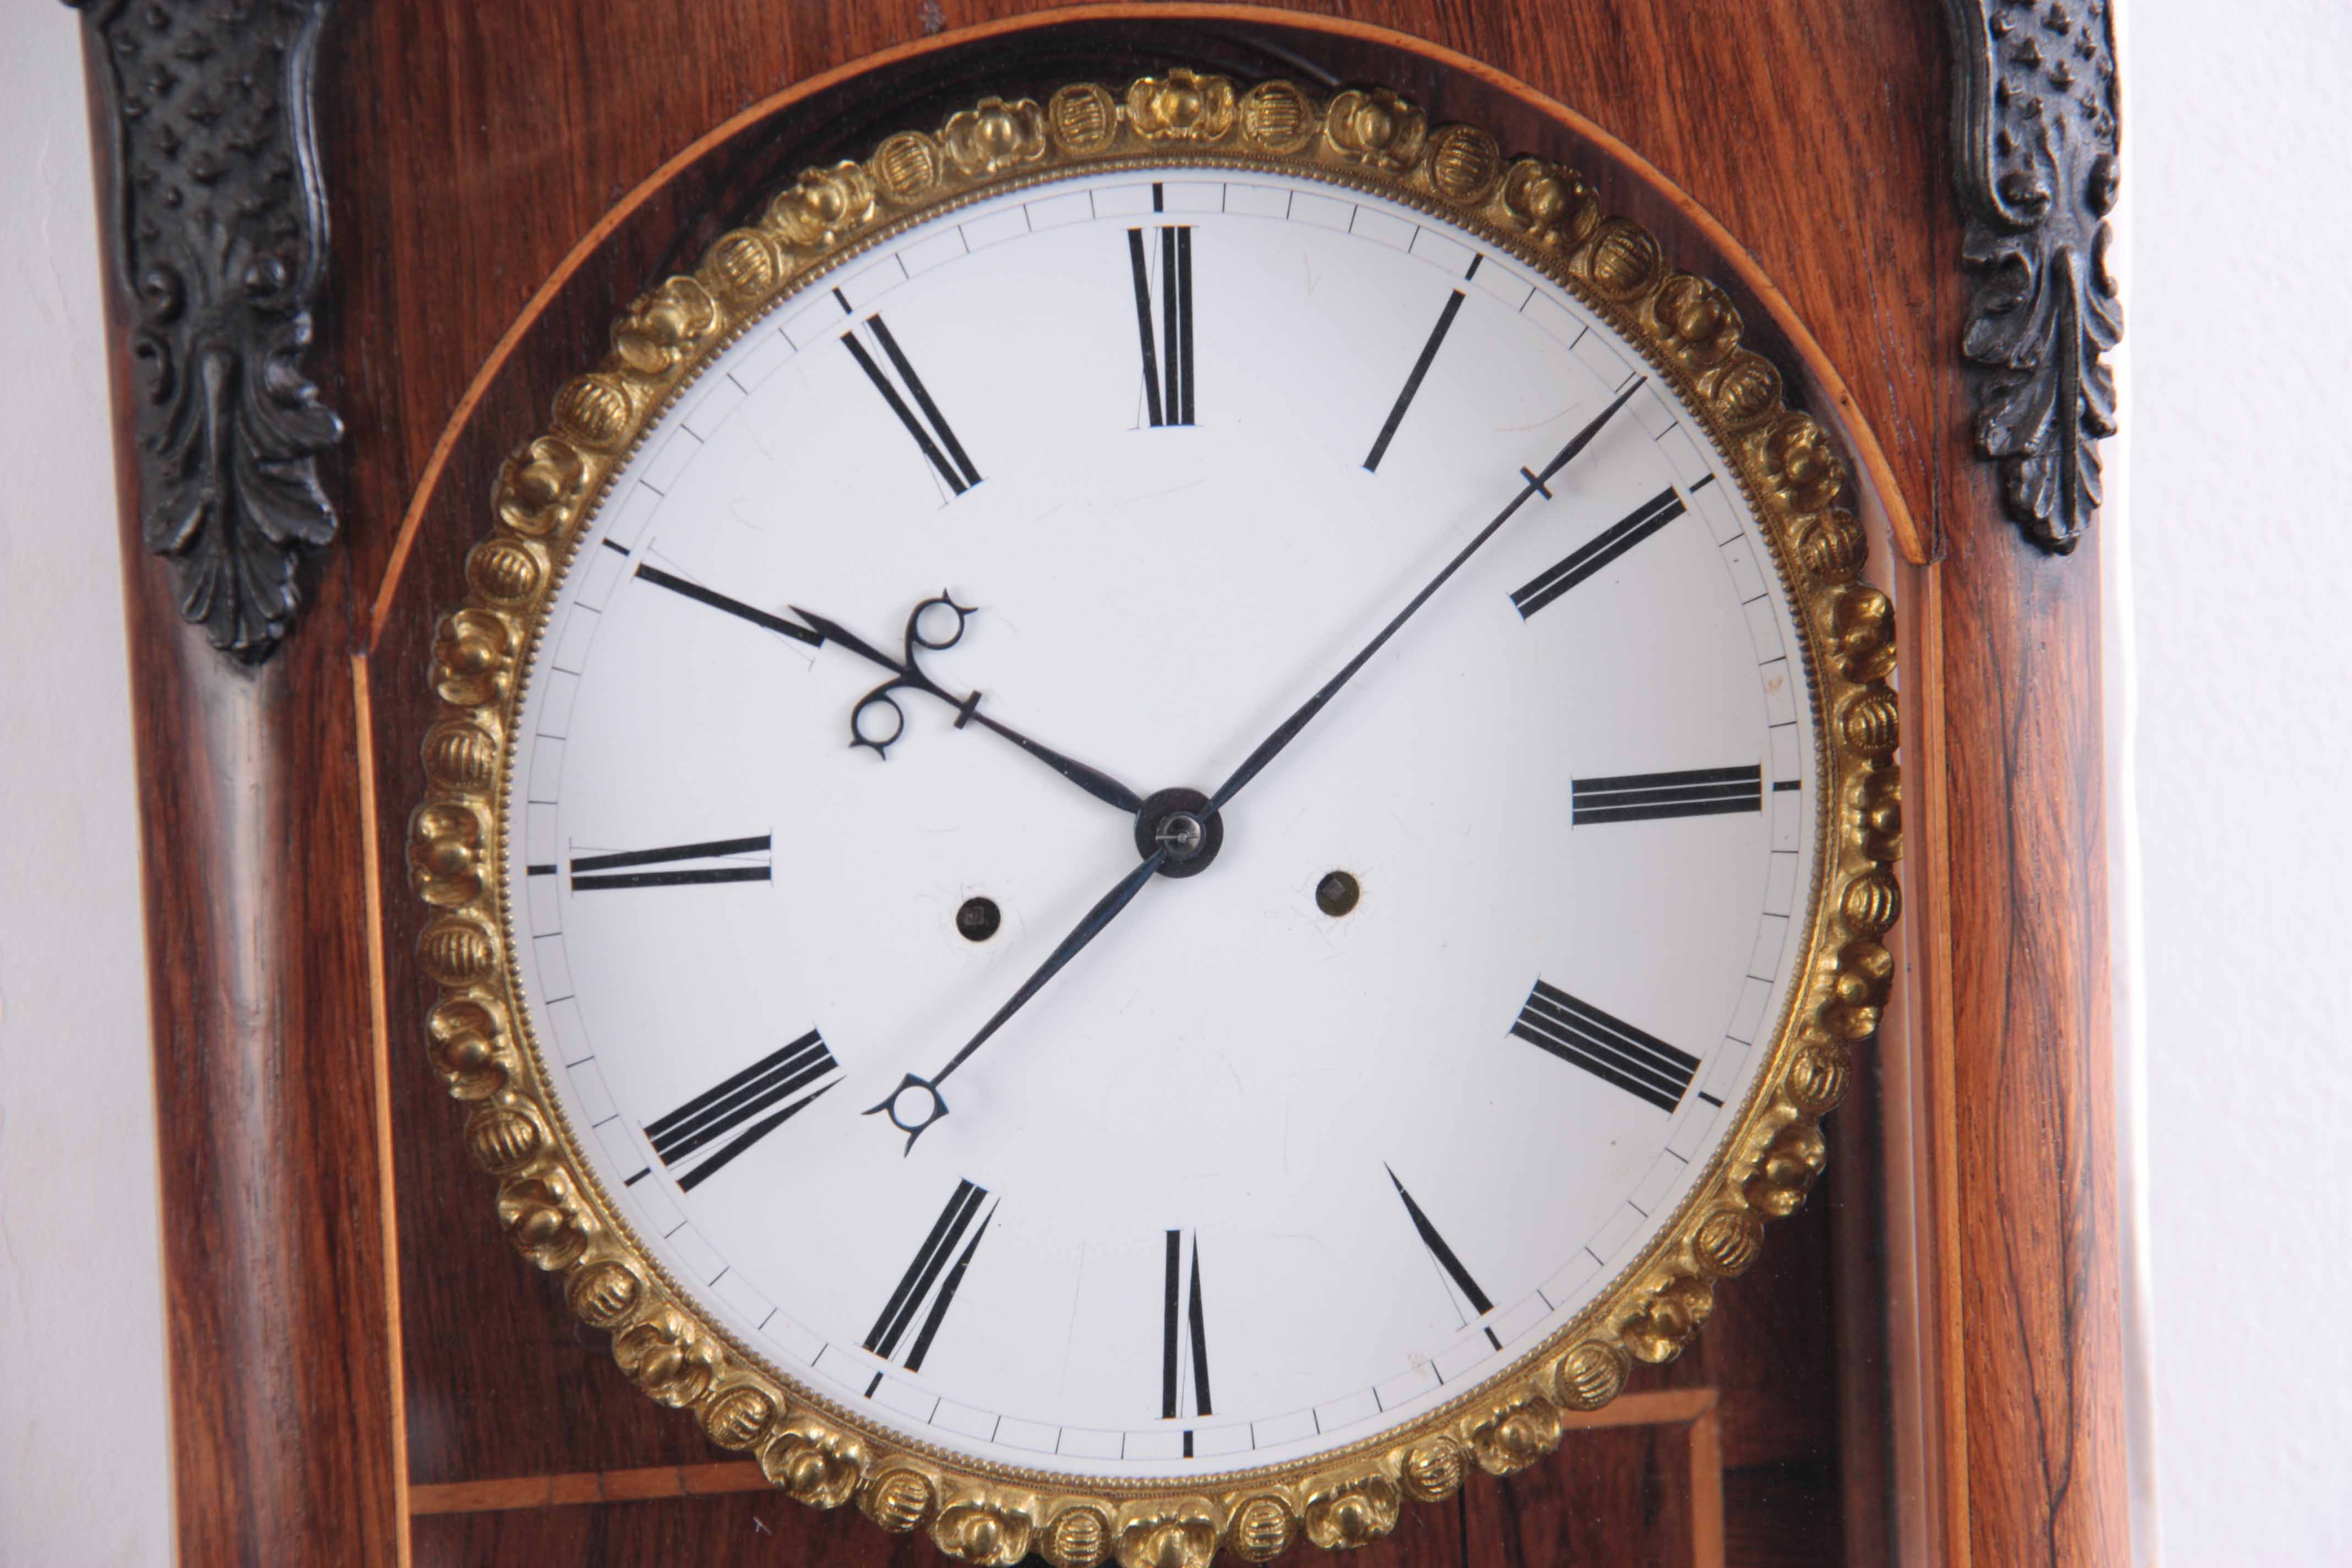 A MID 19th CENTURY BIEDERMEIER VIENNA REGULATOR WALL CLOCK the rosewood case having a carved - Image 5 of 12